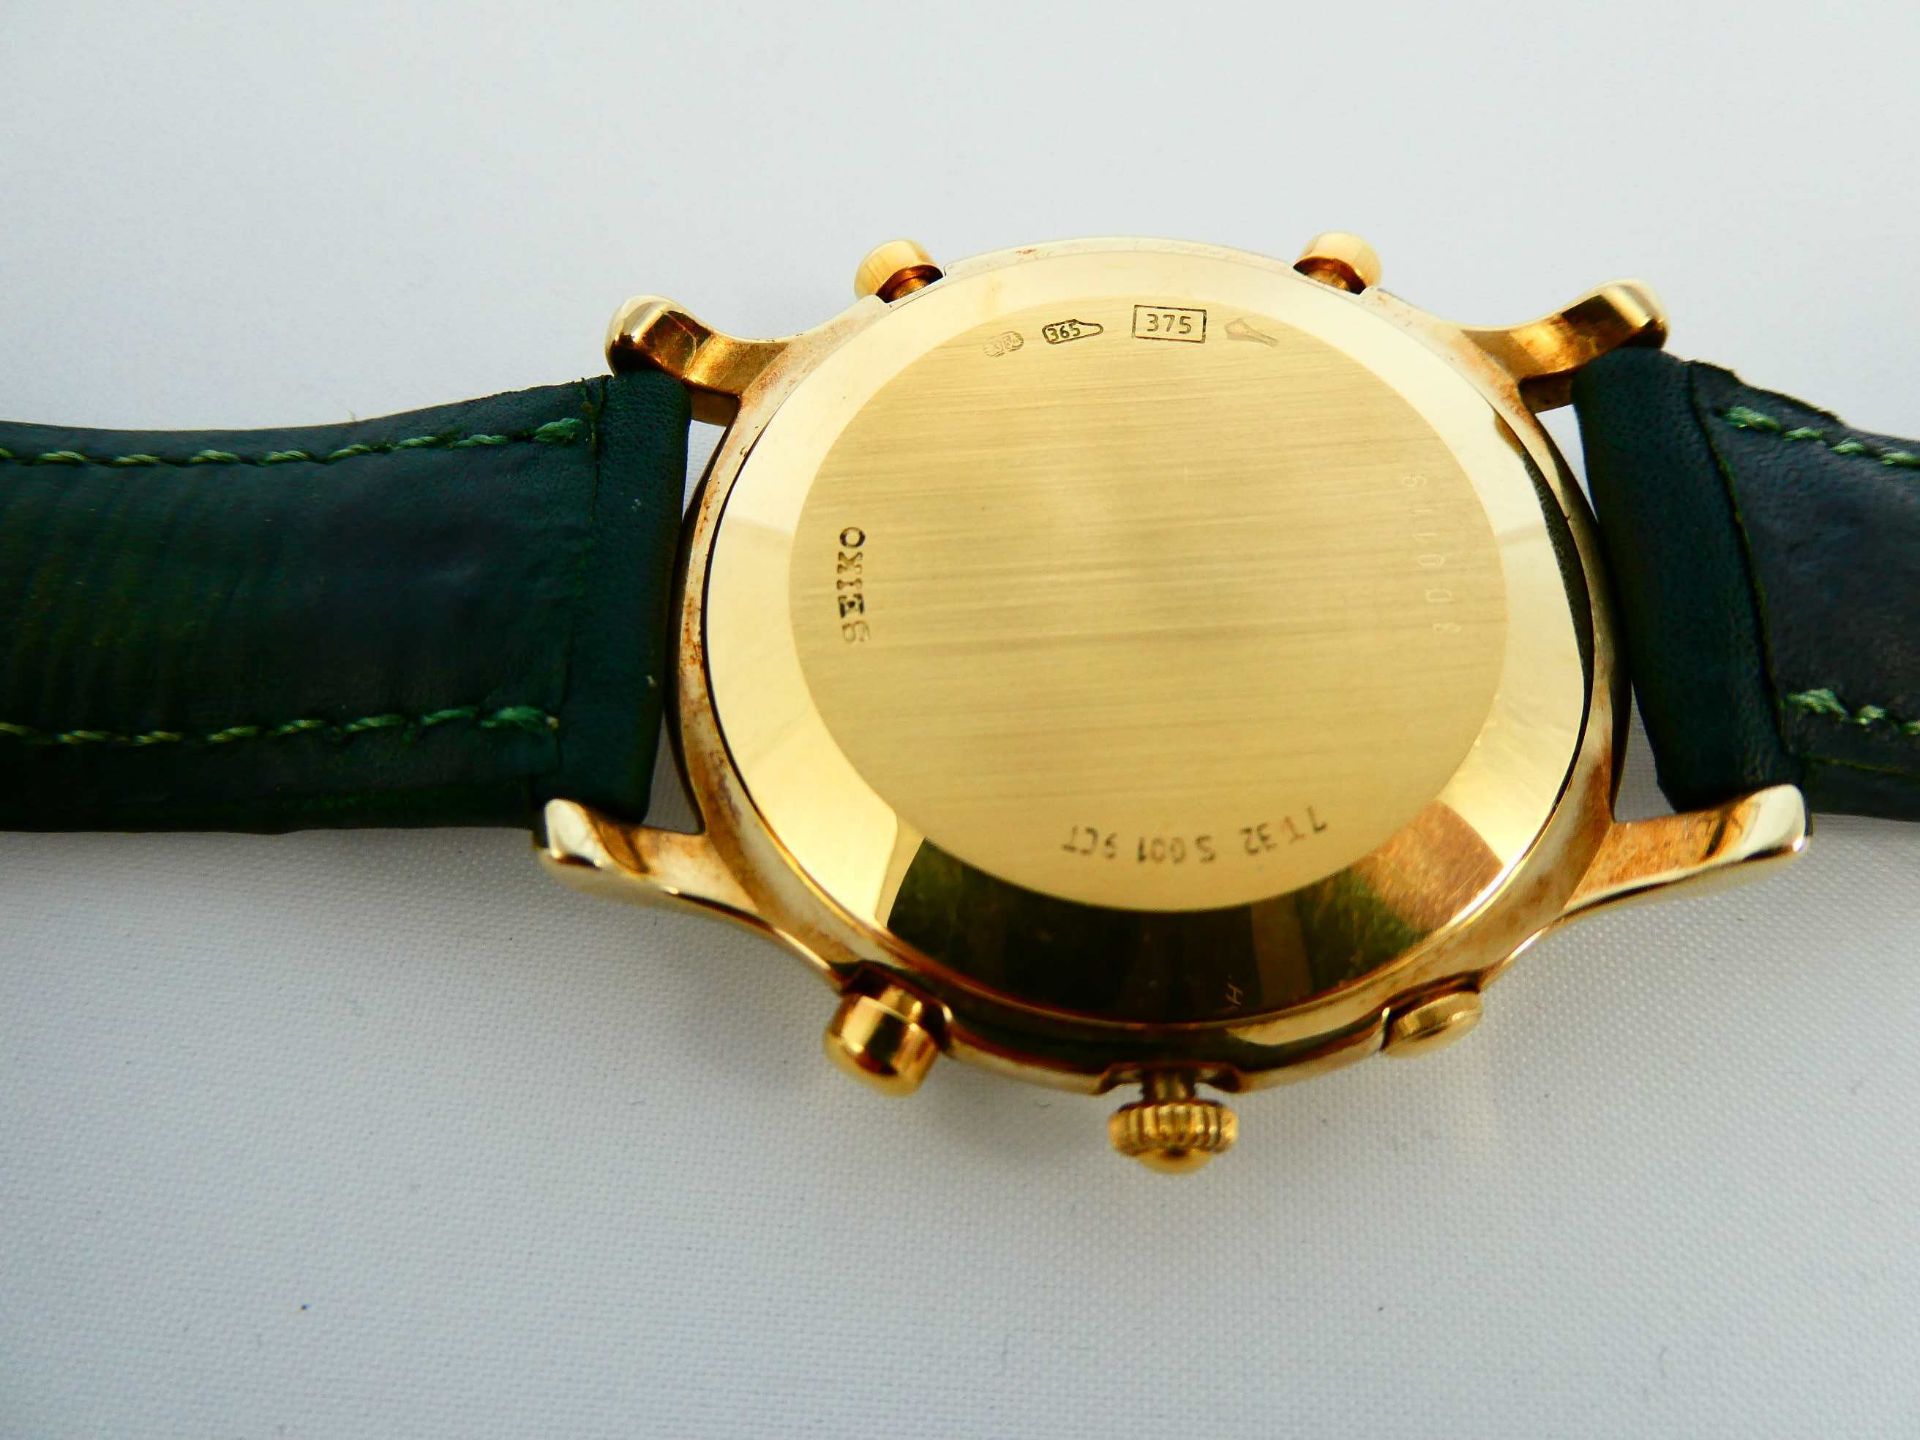 Seiko Chronograph in Gold - Image 4 of 4